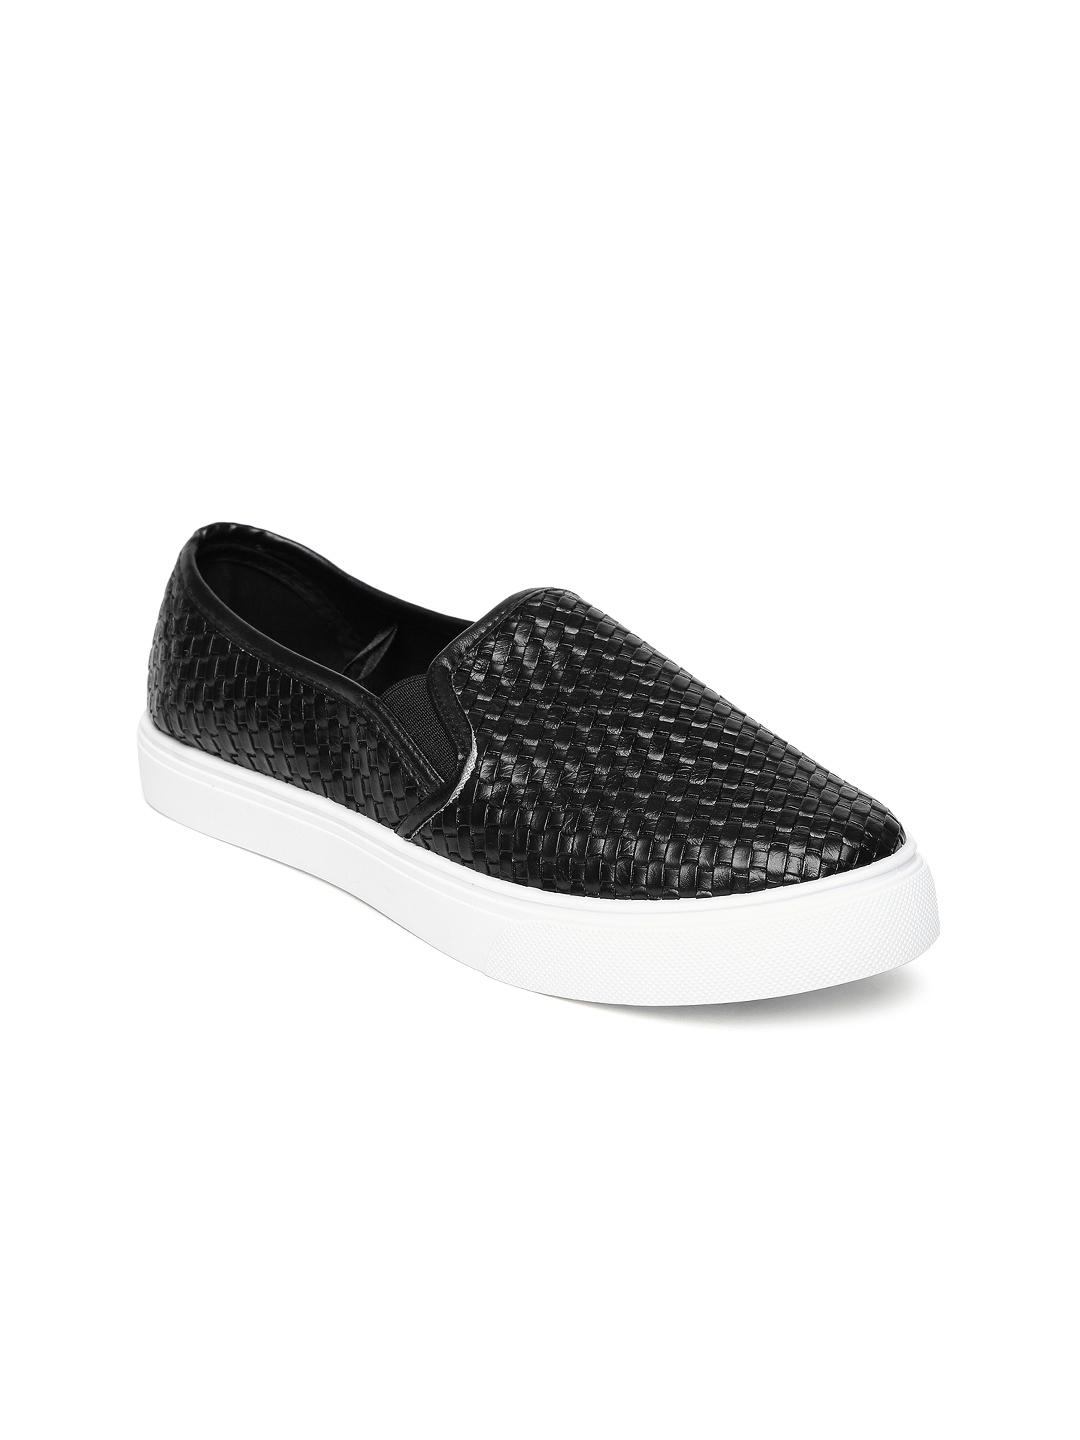 Buy People Women Black Textured Slip On Sneakers - Casual Shoes for ...